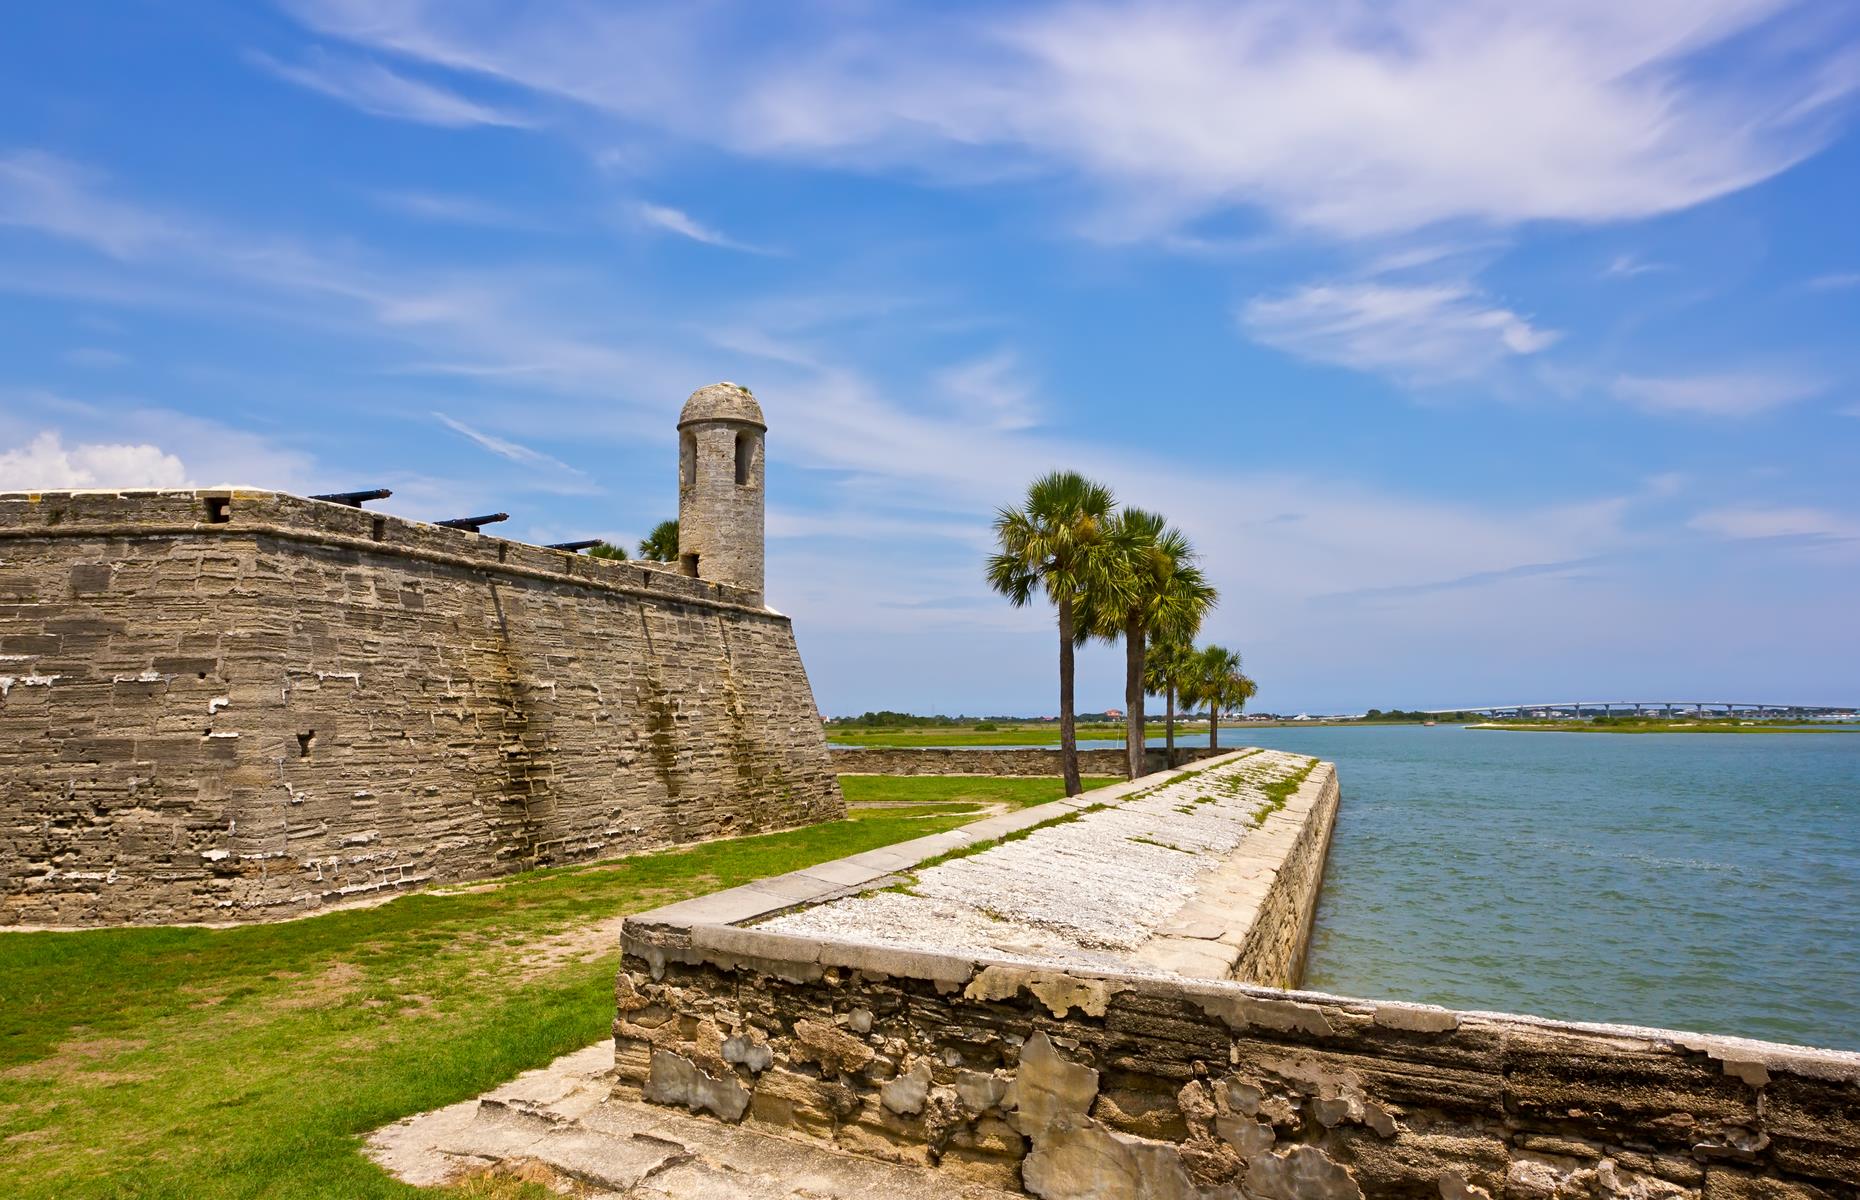 <p>A brooding fortress in America’s oldest city, Castillo de San Marcos was built by the Spanish from 1672, in order to defend St Augustine and Florida from British invasion. It replaced an earlier series of wooden forts here, and provided a vital line of defence during the infamous 1702 Siege of St. Augustine, which saw English forces again attempt to take Florida from colonial Spain. Today the masonry fort, the oldest in the continental USA, is miraculously preserved with its hulking bastions, gun deck and stunning view.</p>